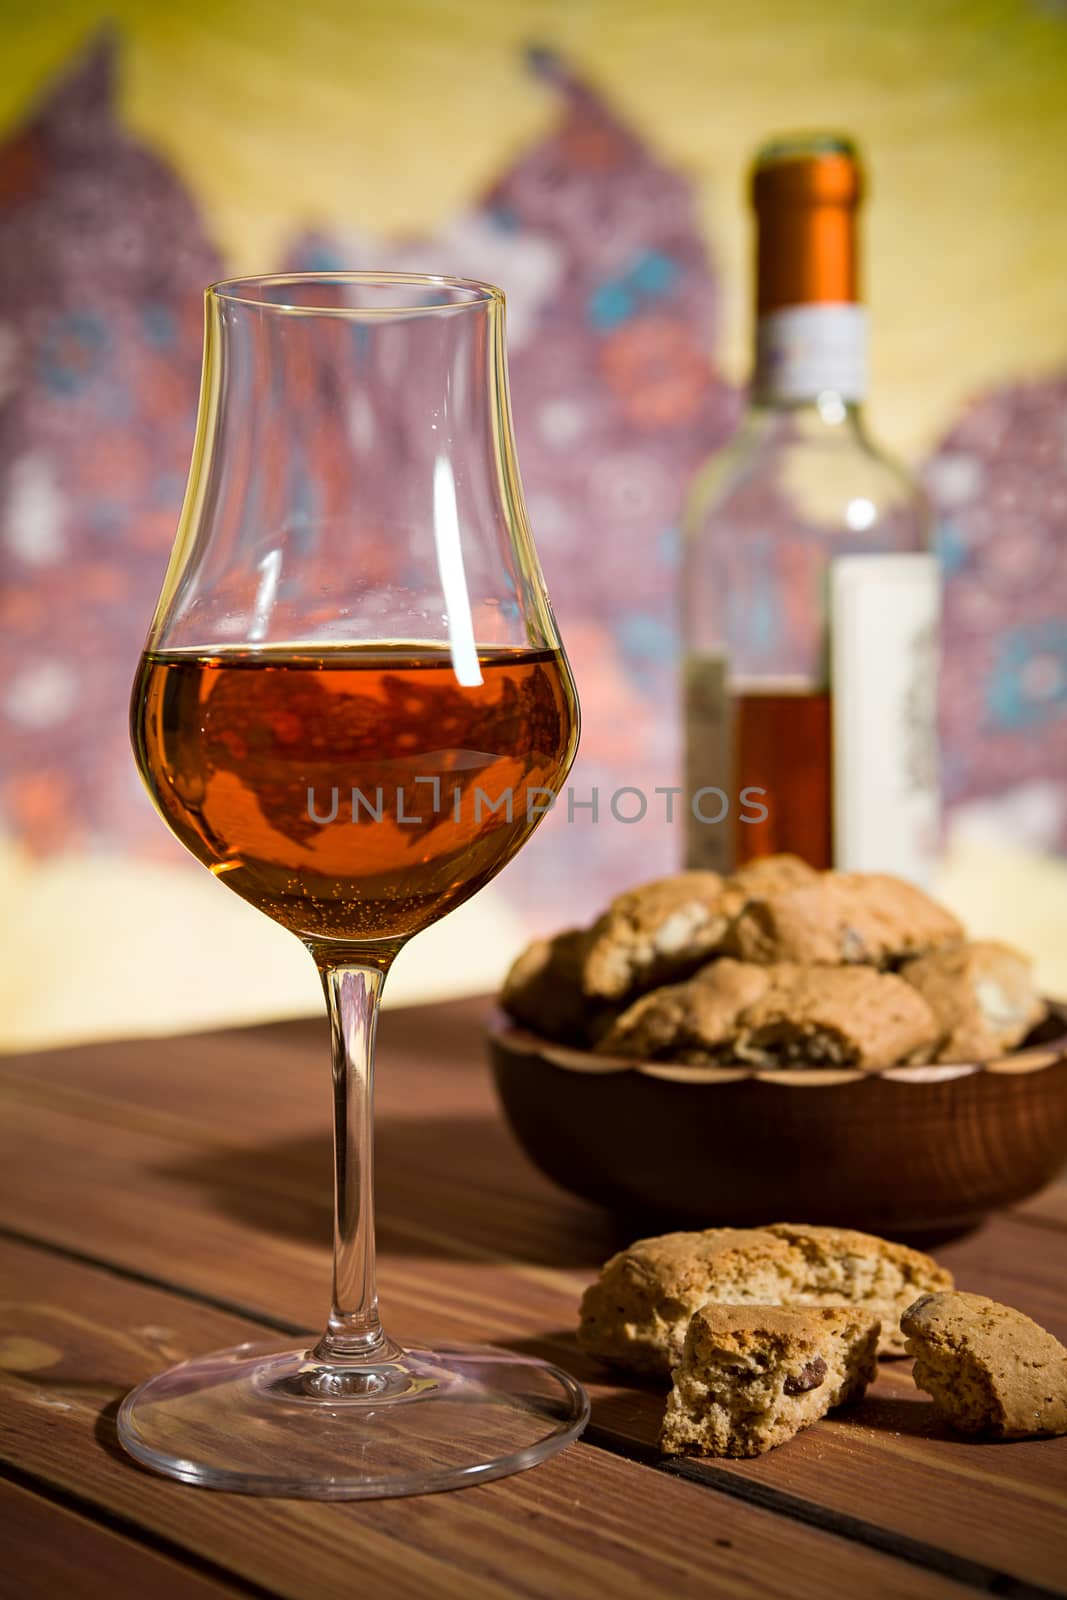 Closeup of a glass of Italian vin santo wine and cantucci biscuits on a wooden table